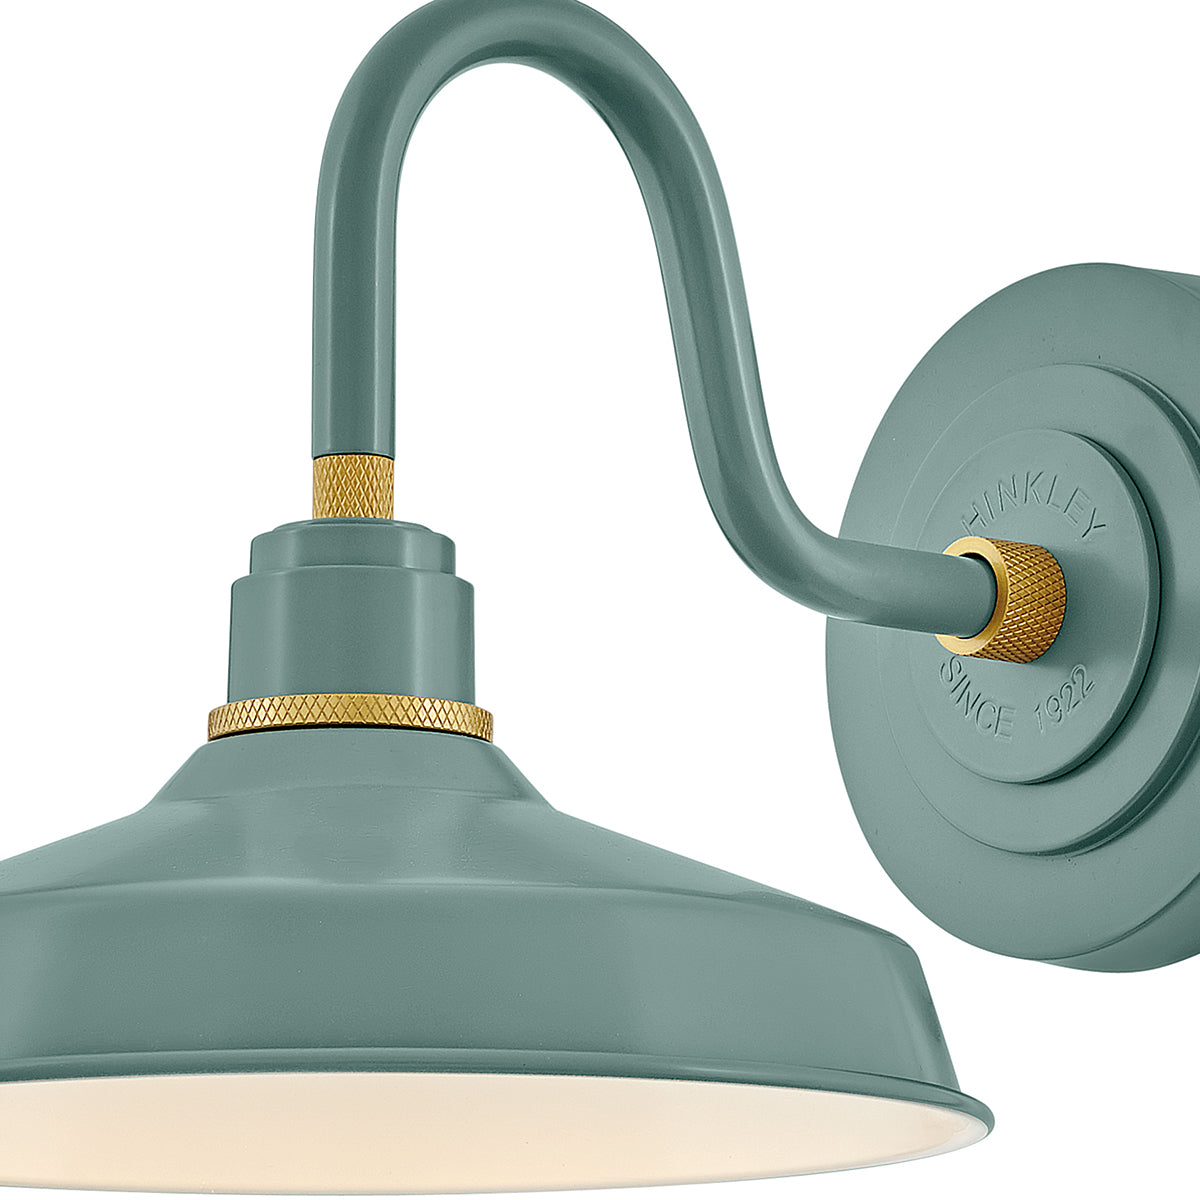 Foundry 1L Small Barn Light - 10231SGN